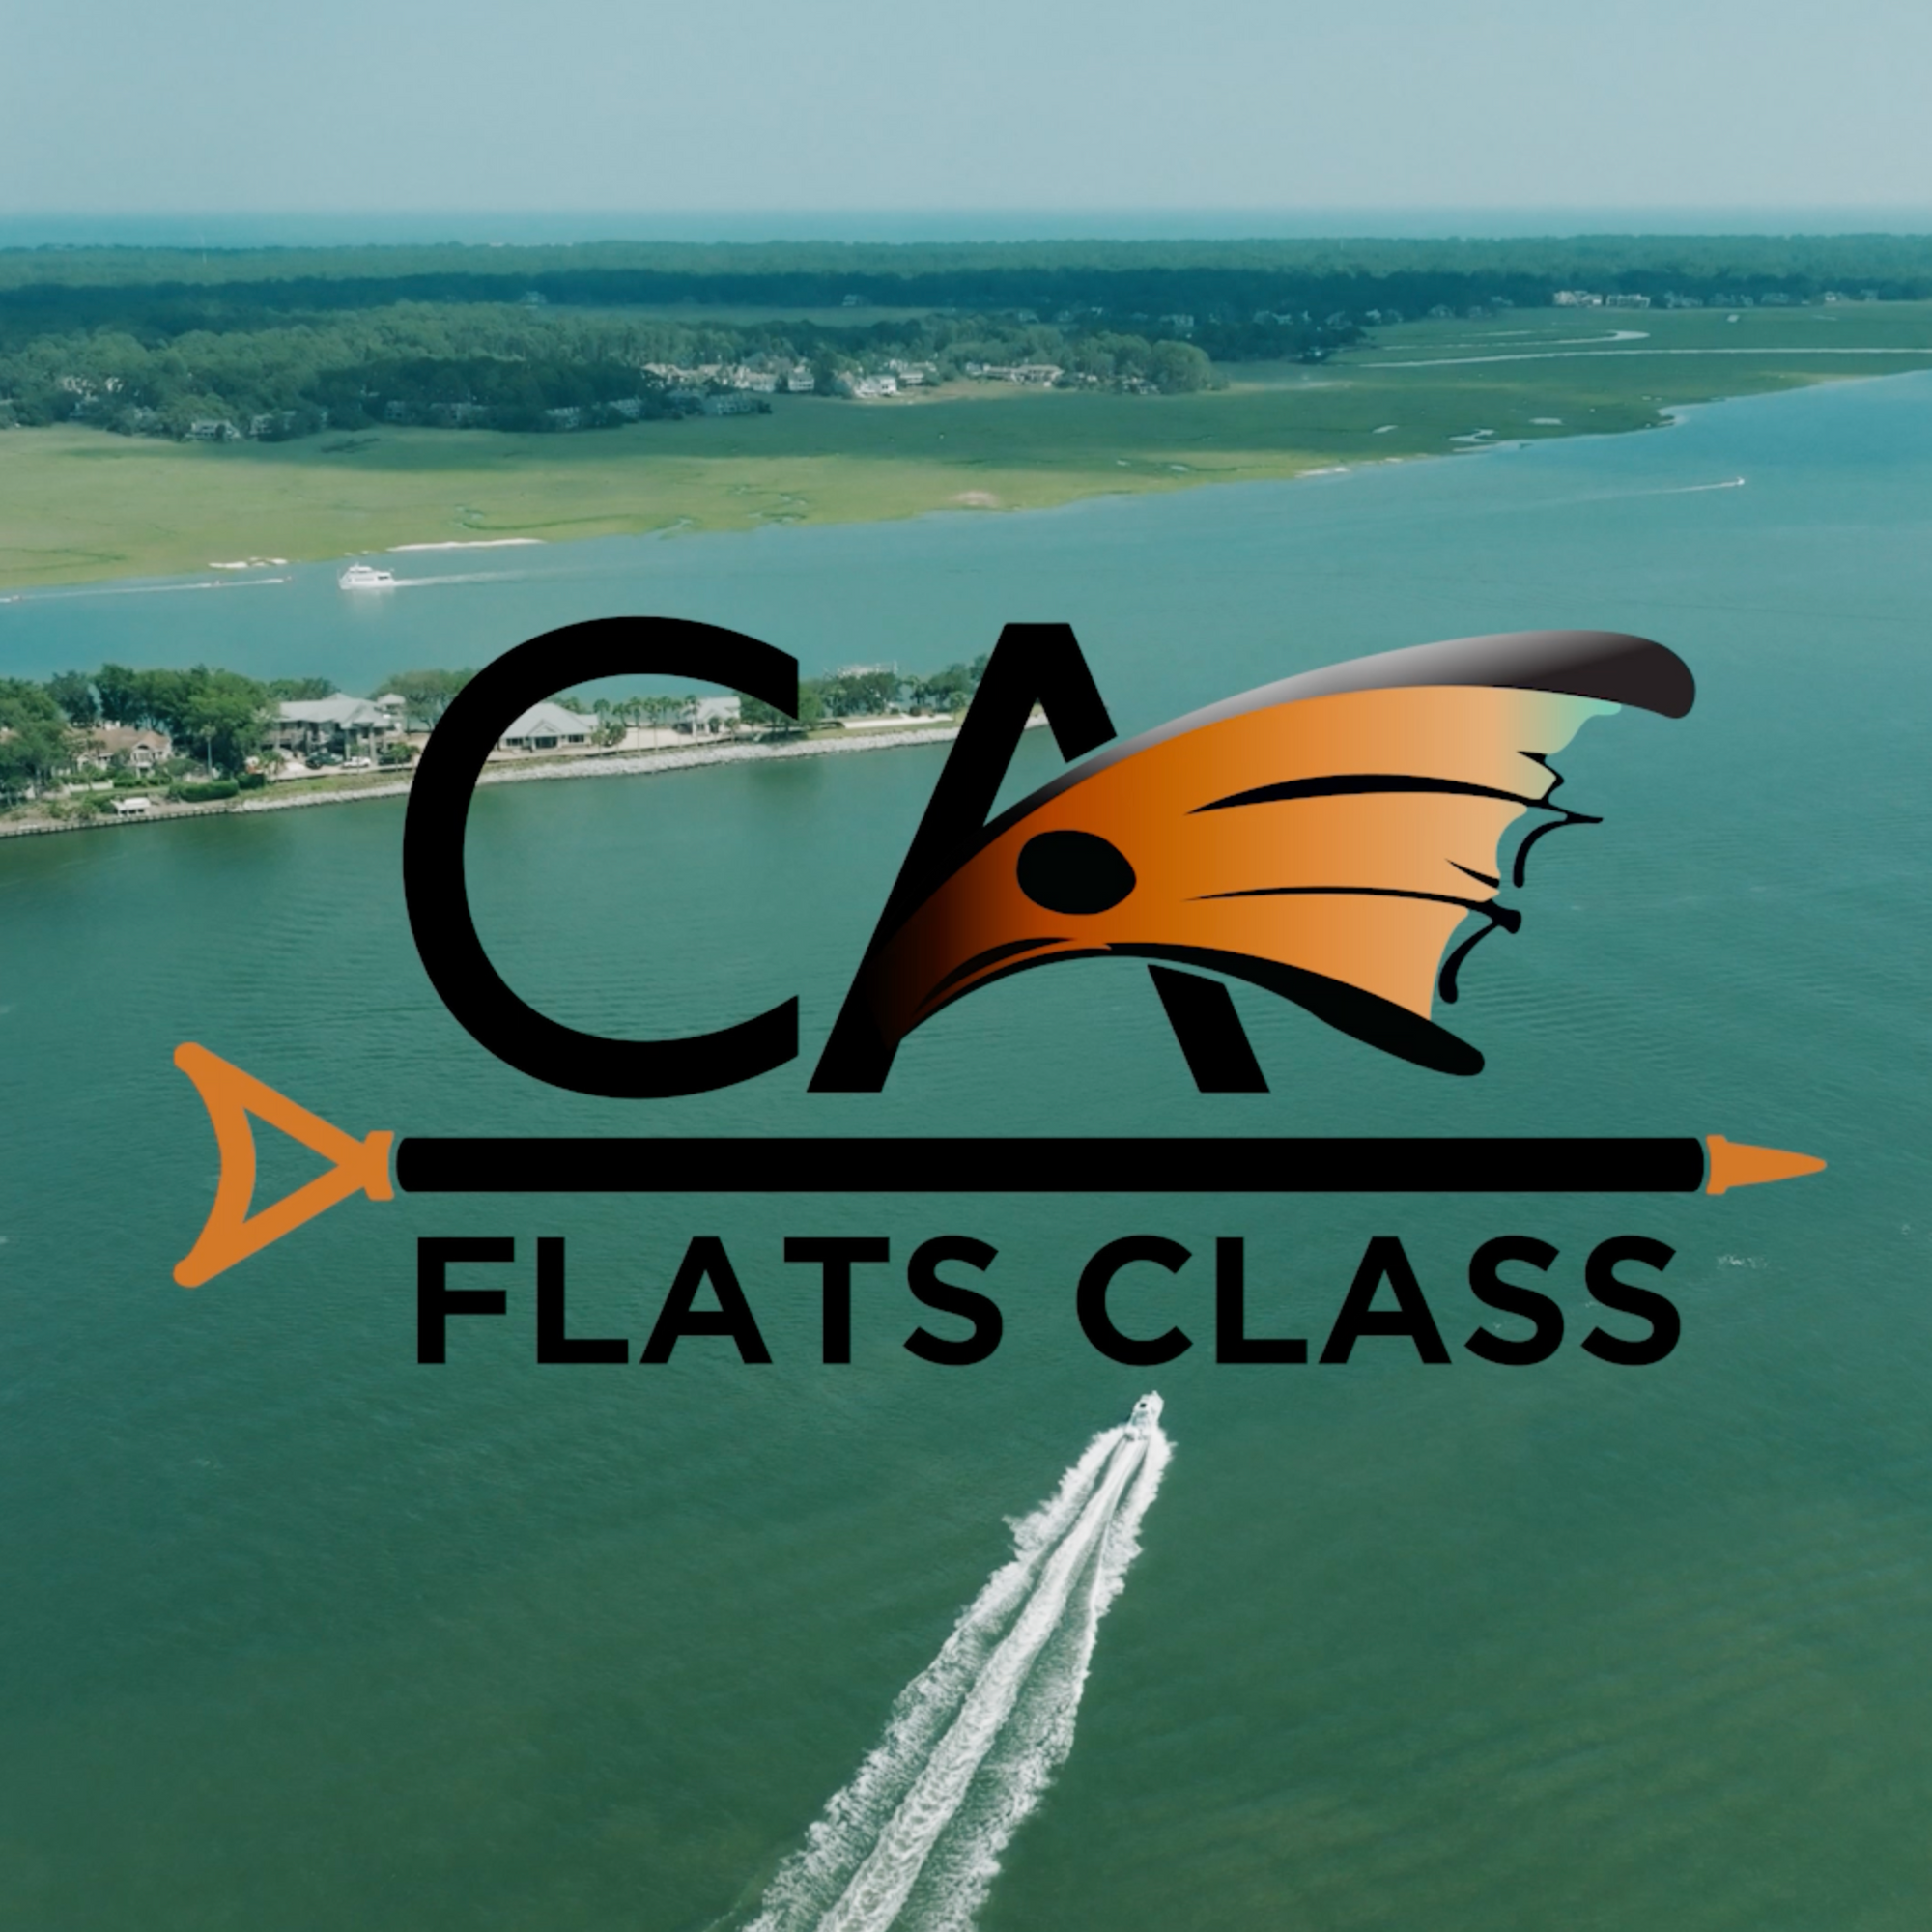 Just released! Watch now on @waypointtv & @flatsclasstv Fishing for Low Country GT’s!